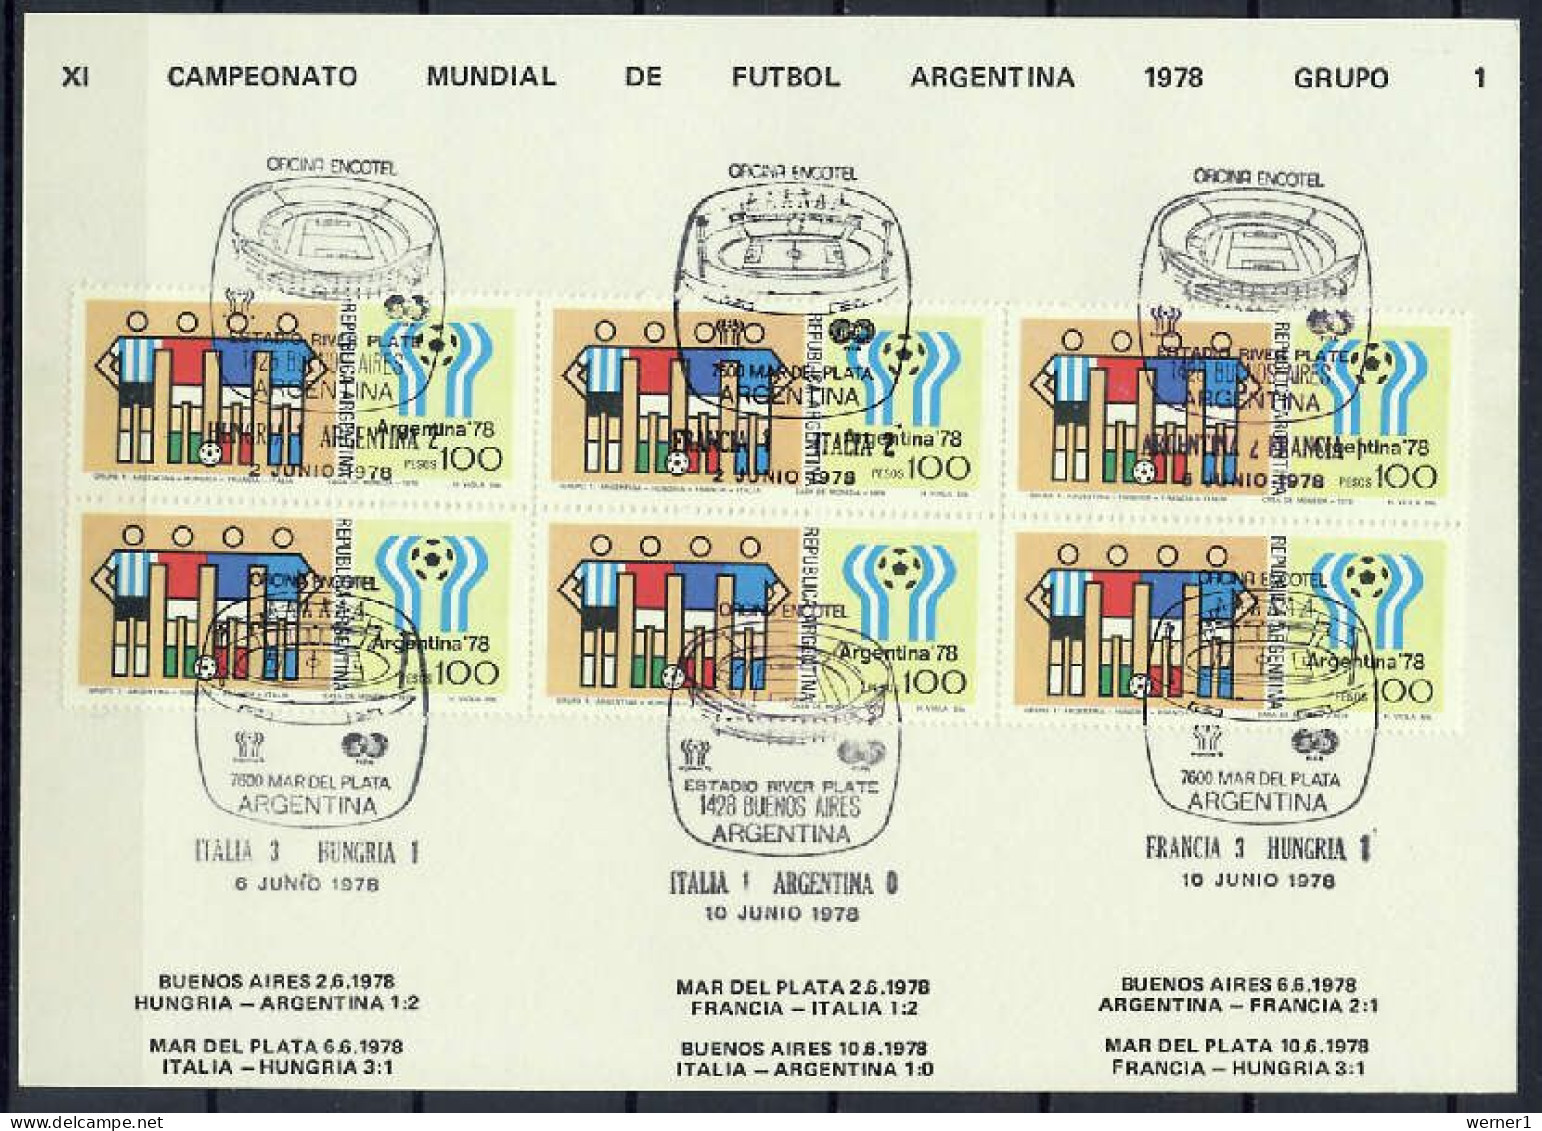 Argentina 1978 Football Soccer World Cup Commemorative Print With Group 1 Results - 1978 – Argentina